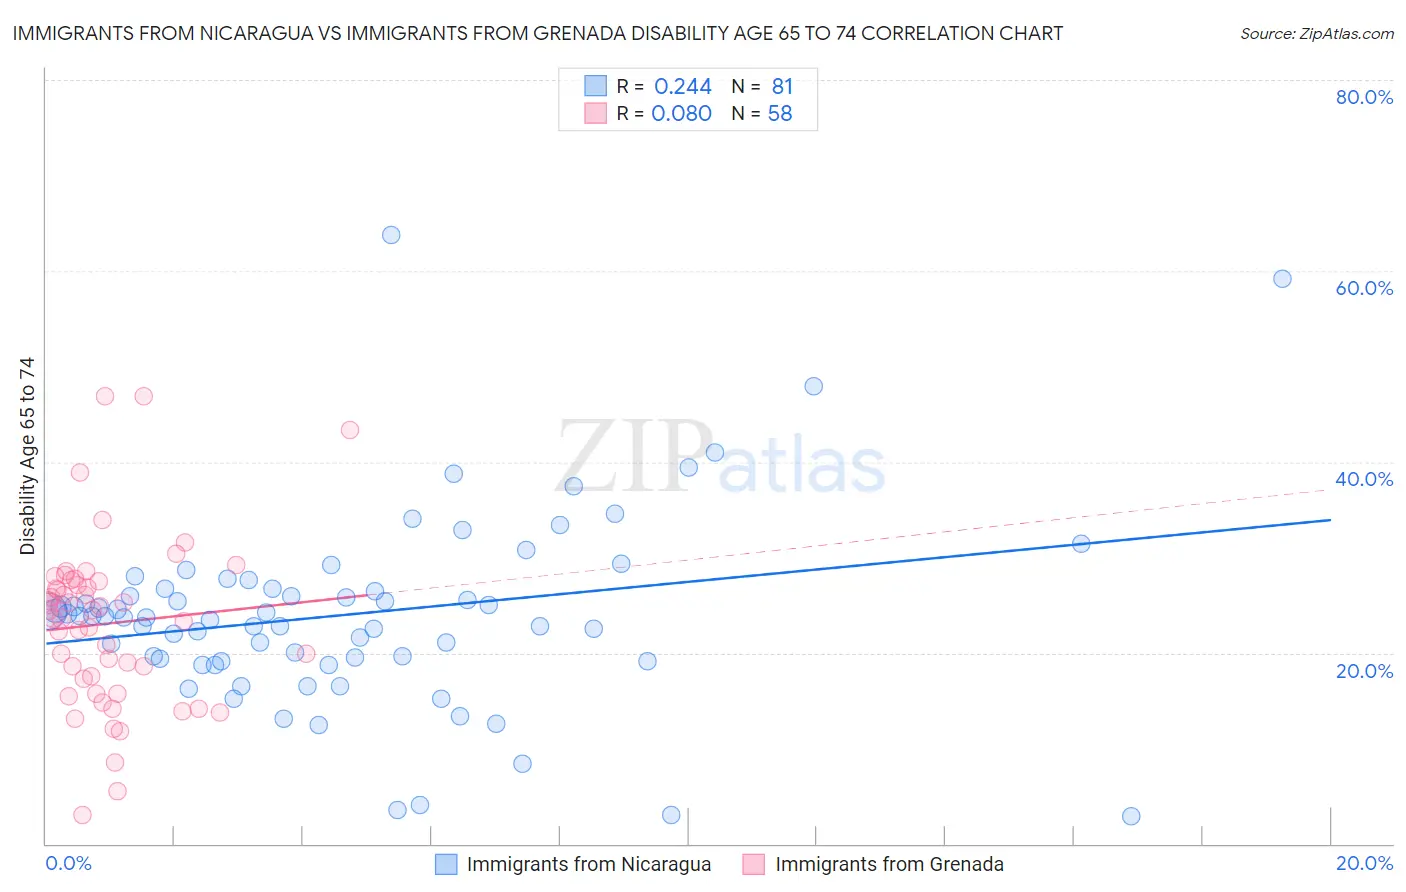 Immigrants from Nicaragua vs Immigrants from Grenada Disability Age 65 to 74